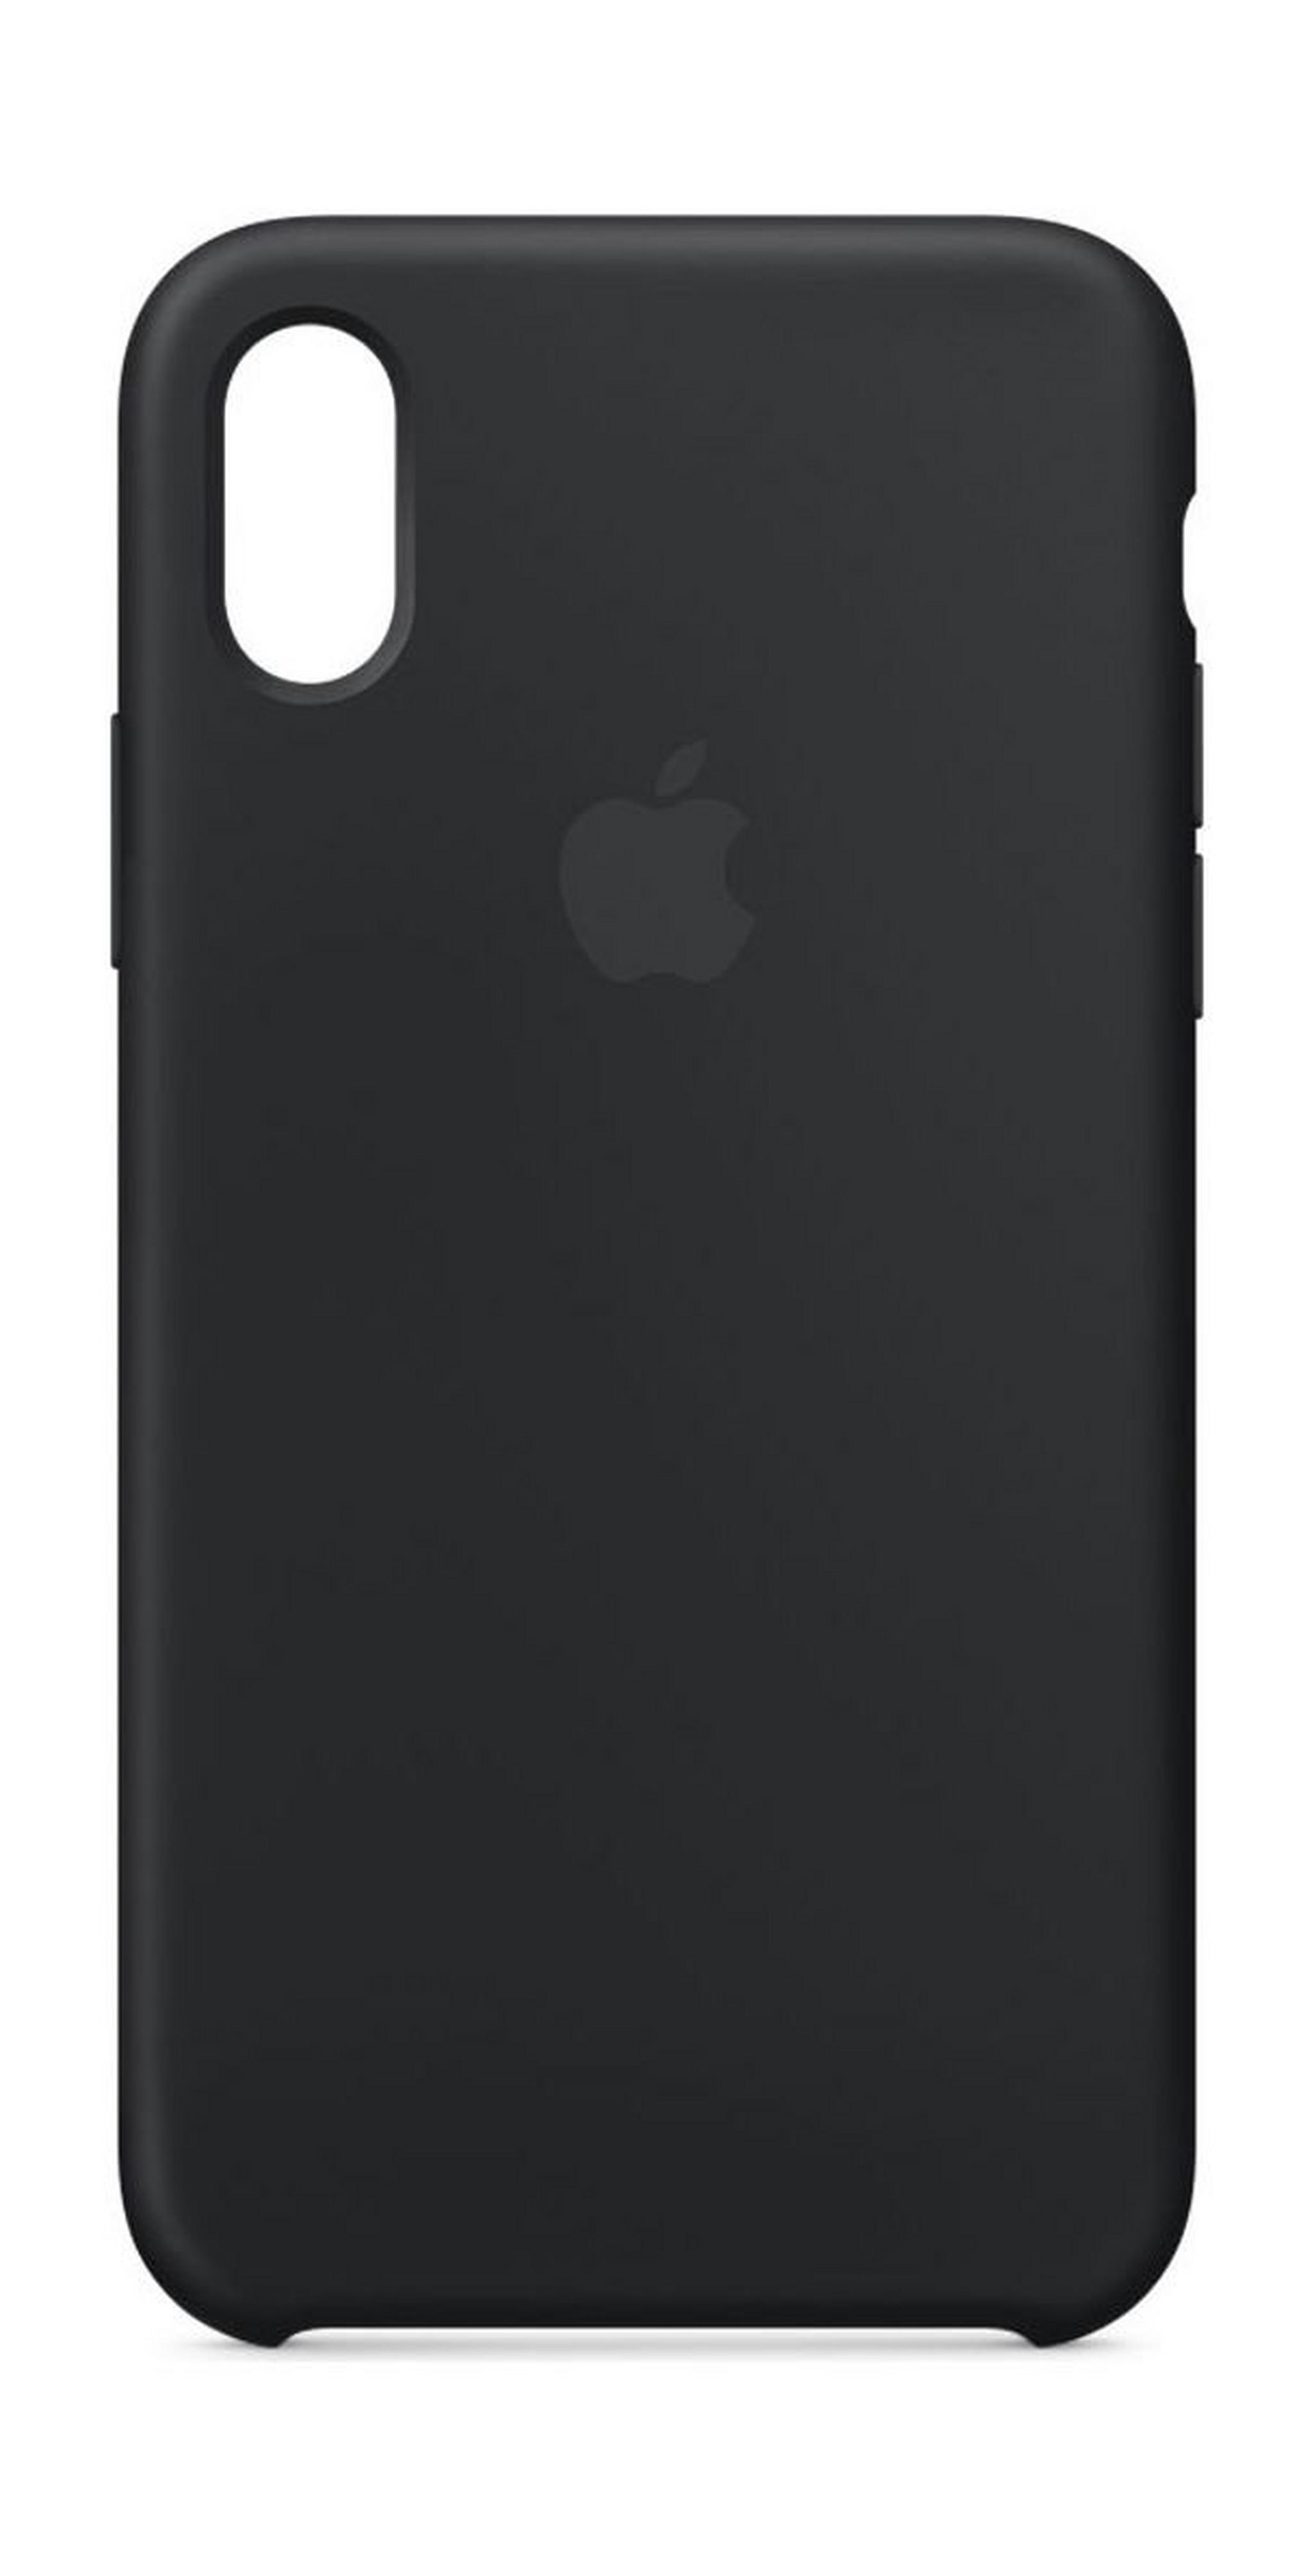 Apple Silicone Case For iPhone X (MQT12ZM/A) - Black